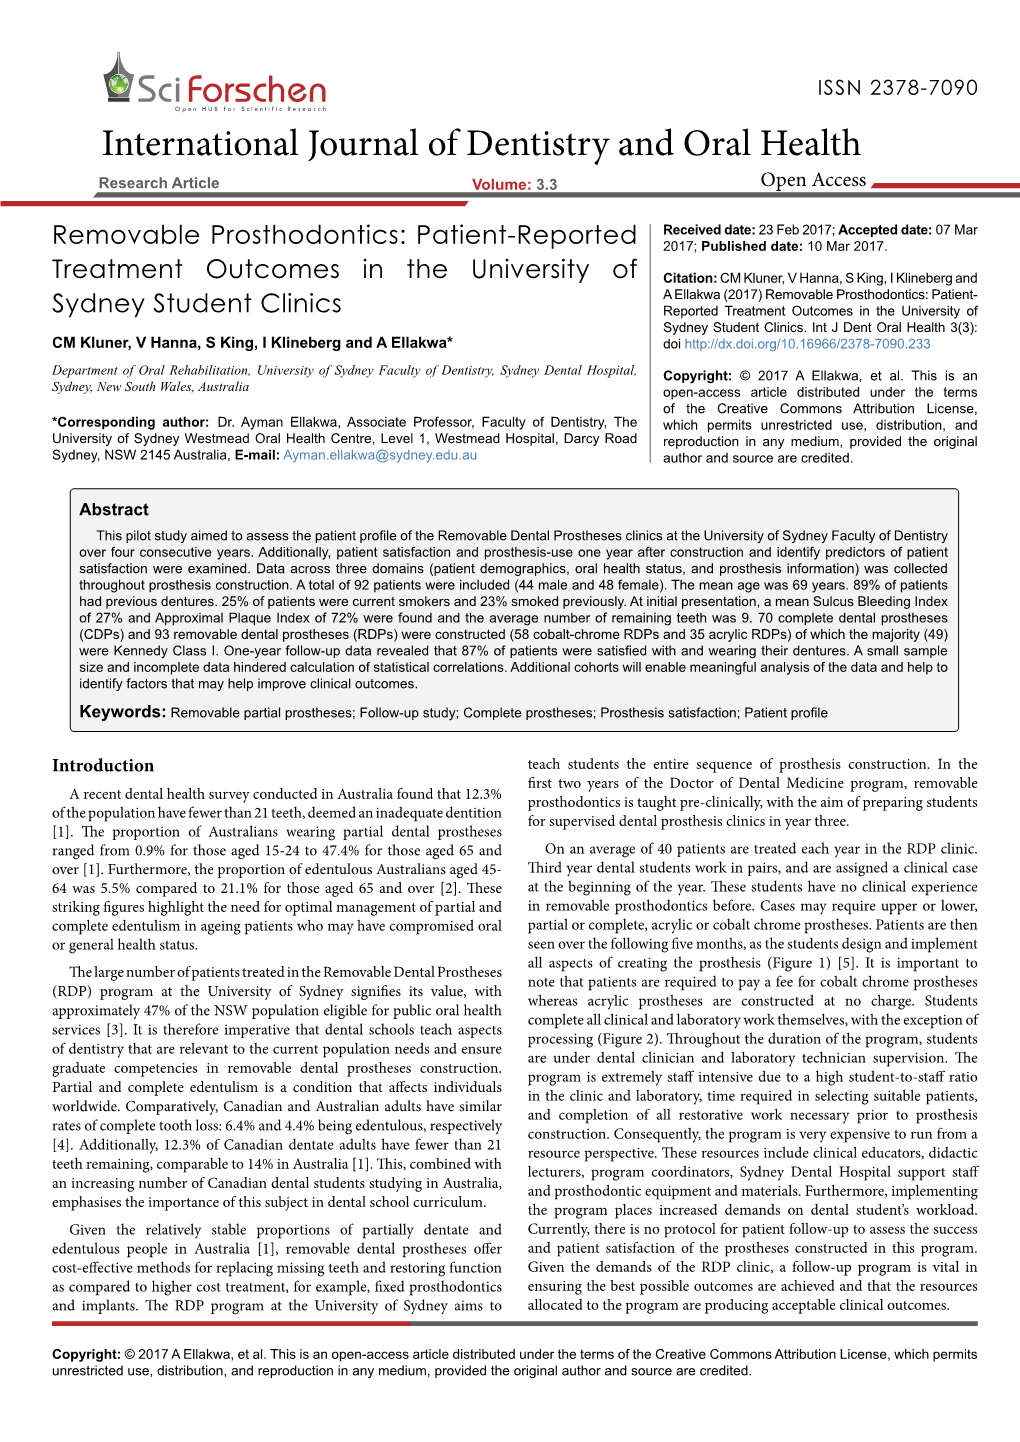 Removable Prosthodontics: Patient-Reportedtreatment Outcomes in the University Ofsydney Student Clinics